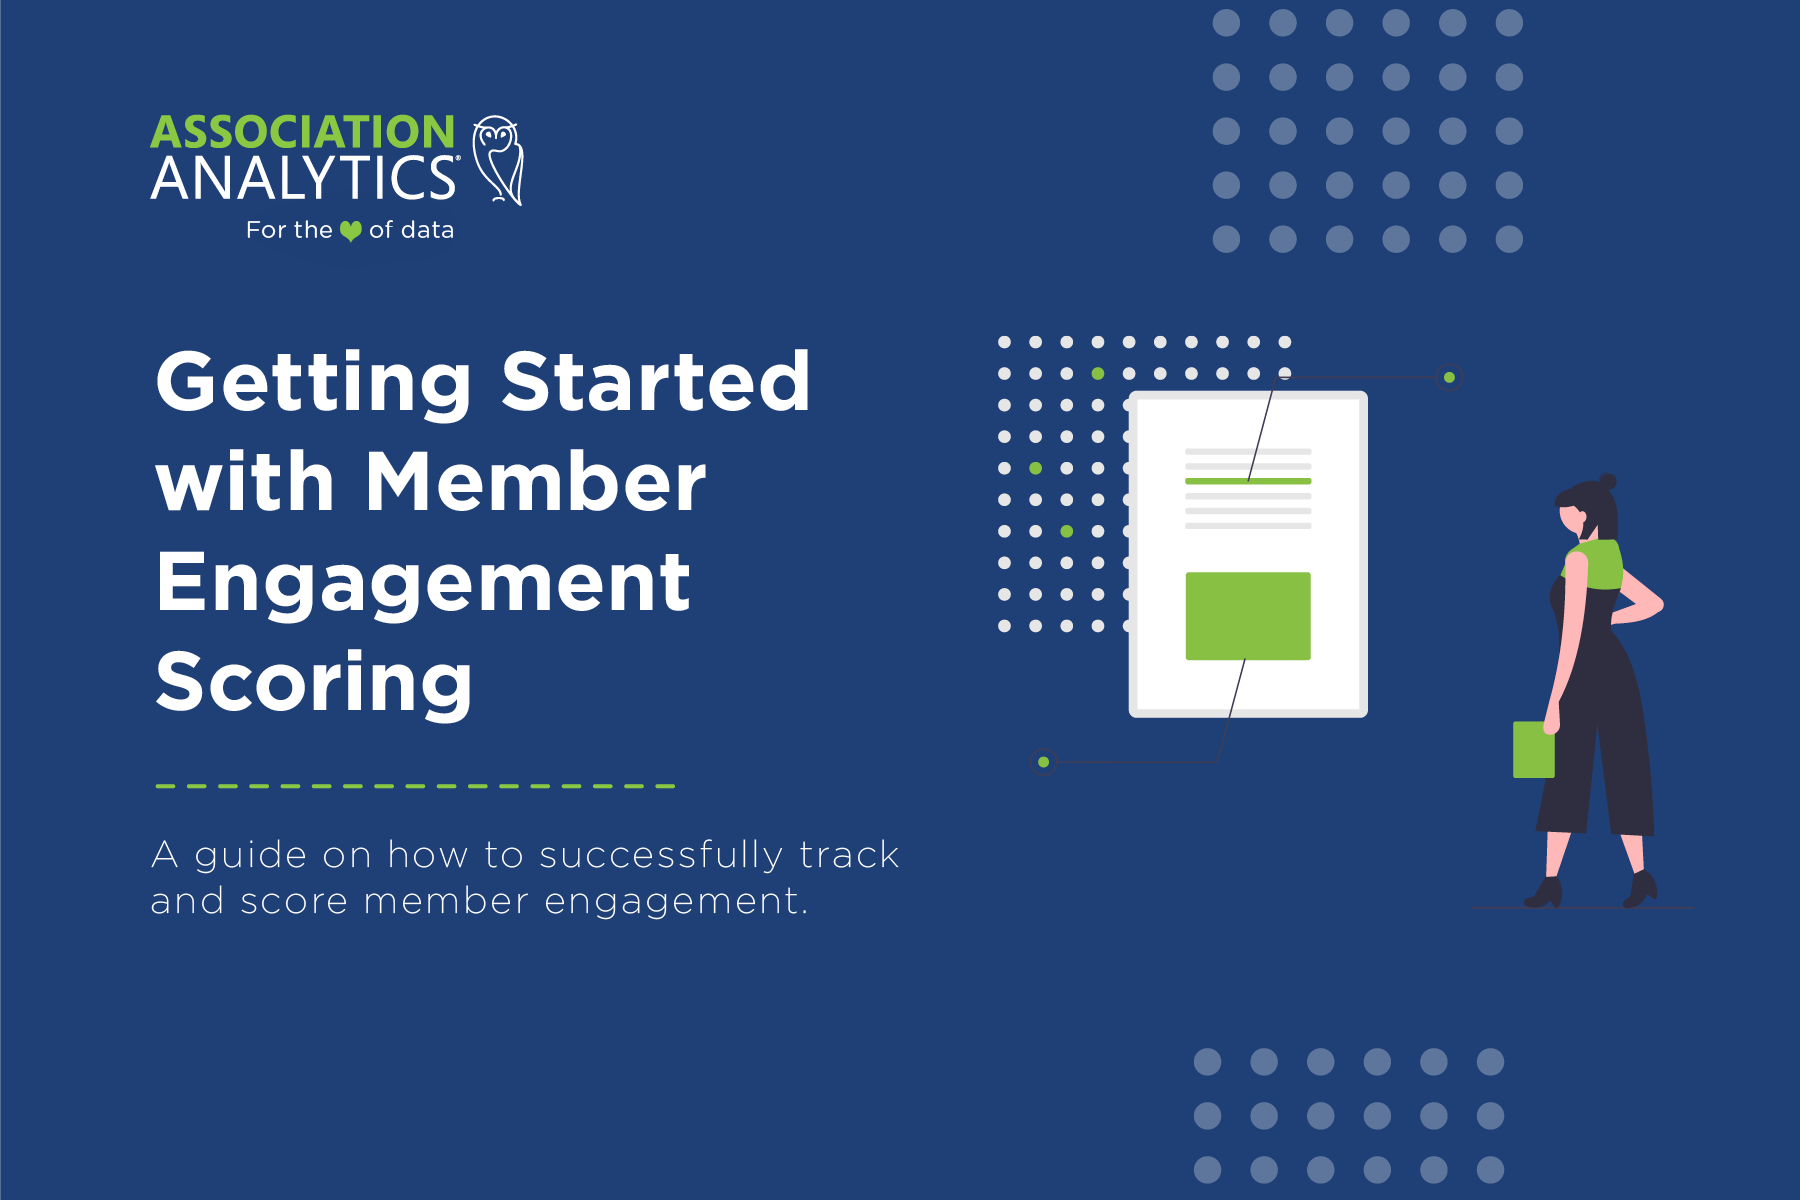 E-book - Getting Started with Member Engagement 2022